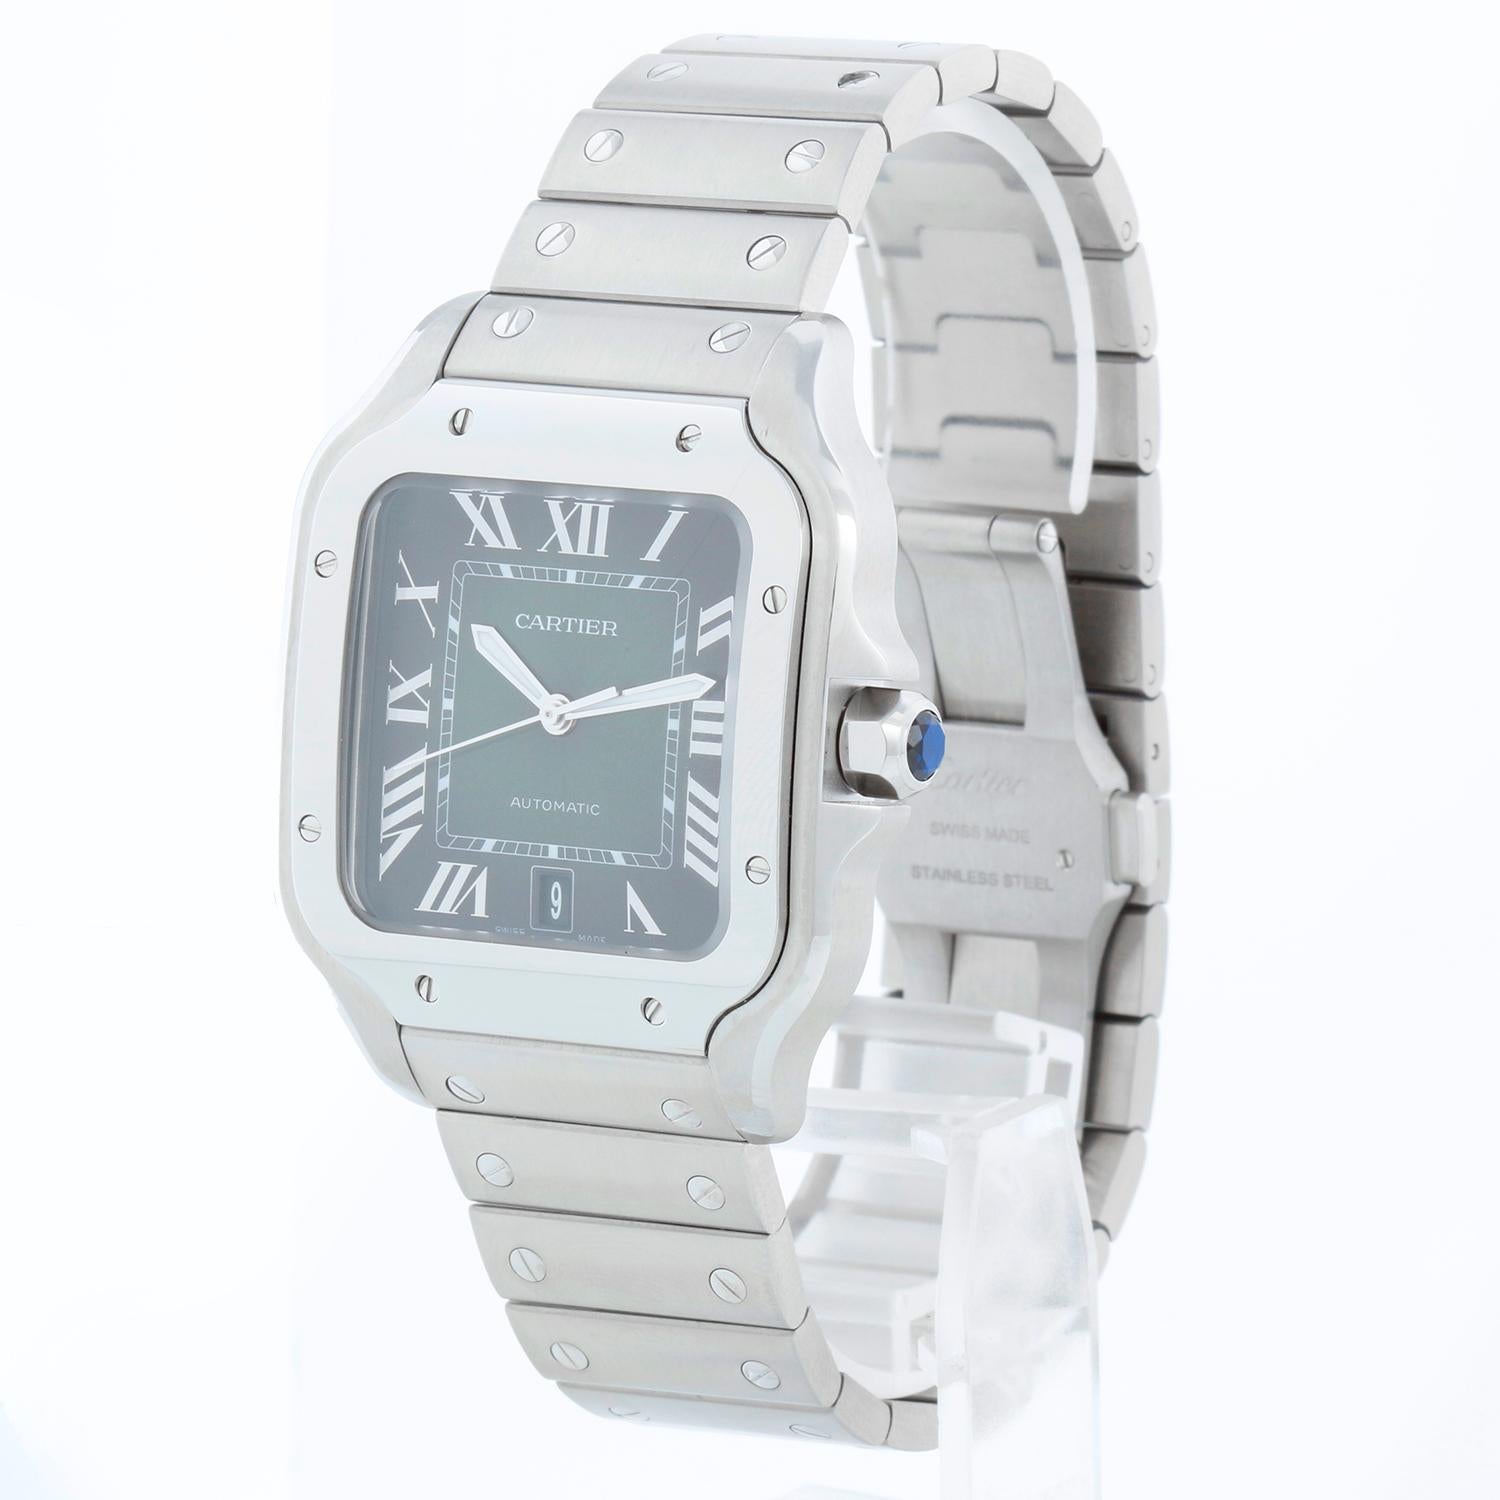 Cartier Santos De Cartier Stainless Steel Large Watch WSSA0062 - Automatic. Stainless steel case ( 39 mm ). Graduated green dial. Stainless steel Santos bracelet; extra green alligator strap with deployant buckle . Unused with Cartier box and card.